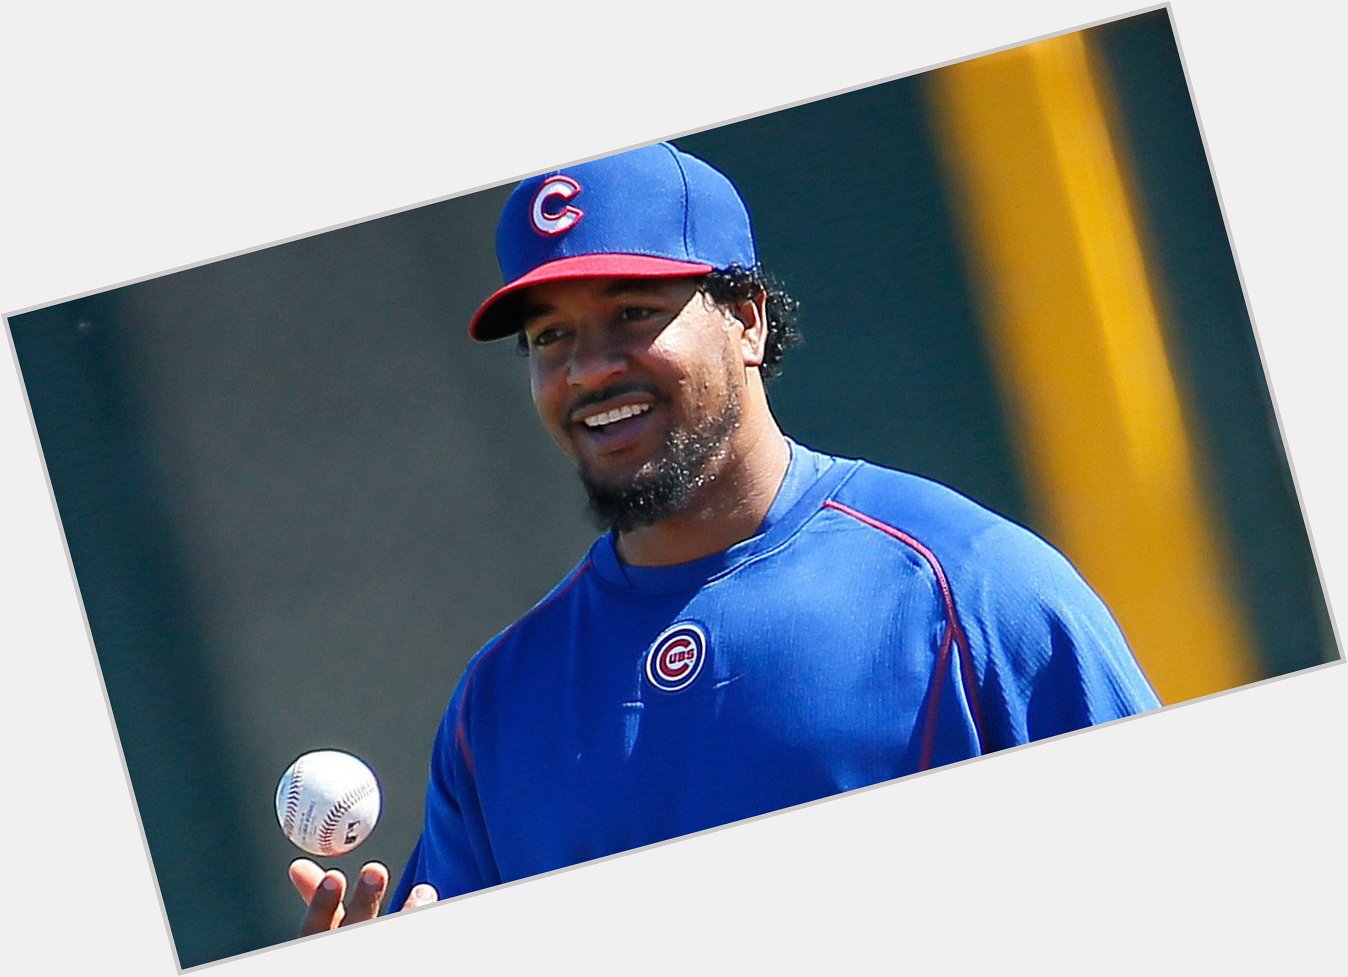 Happy Birthday 12-time All-Star, 9-time Silver Slugger and 2-time World Series champ, Manny Ramirez, 45 today! 